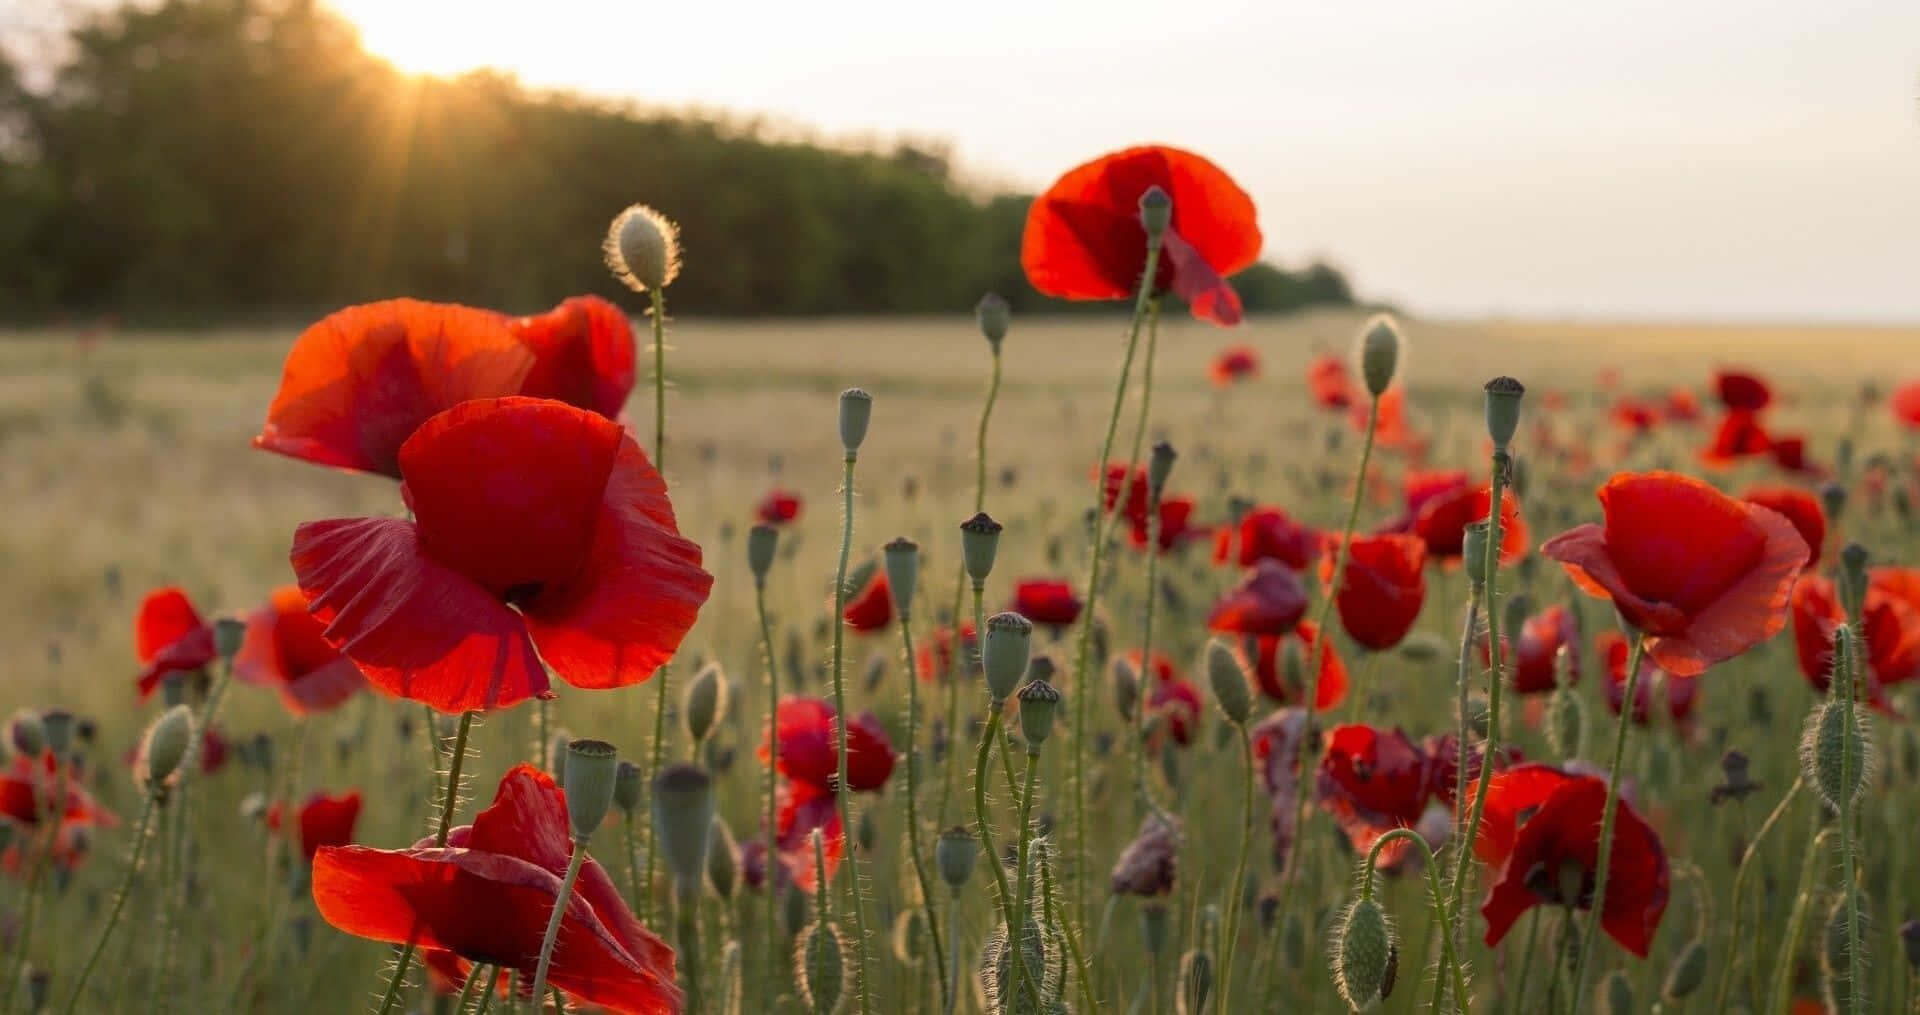 Red Poppies In A Field At Sunset